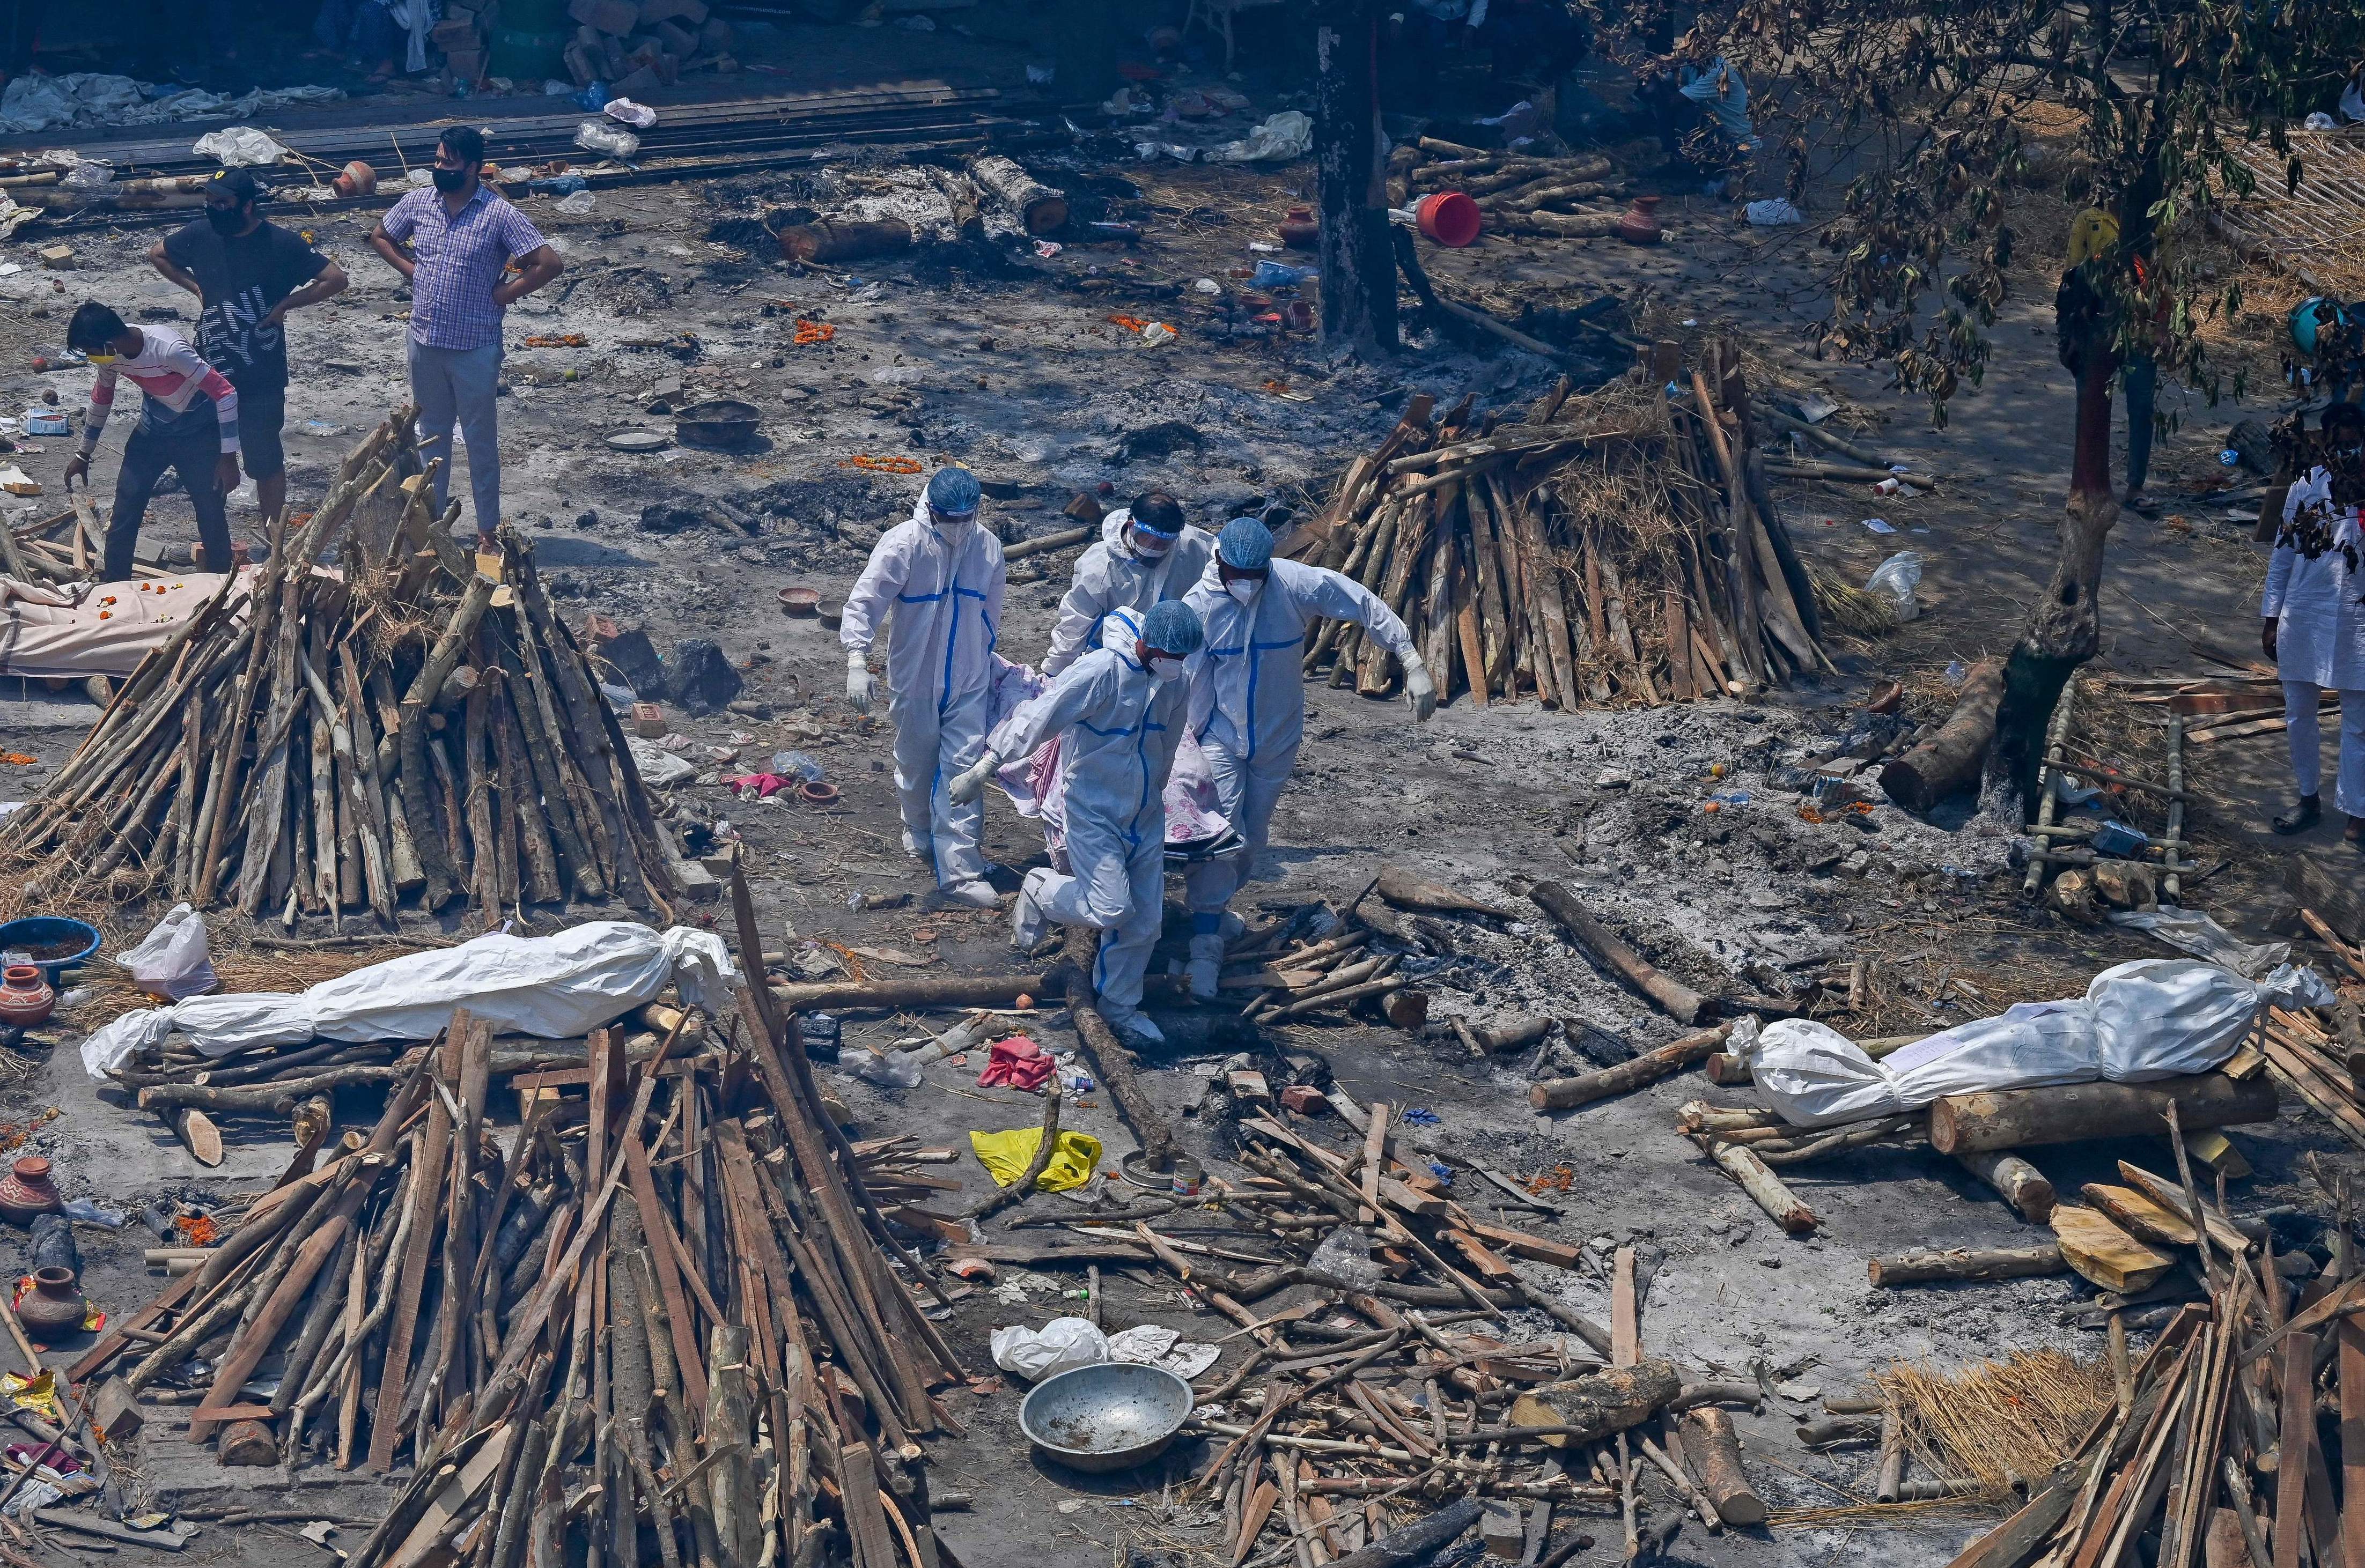 Relatives perform last rites amid funeral pyres during a mass cremation